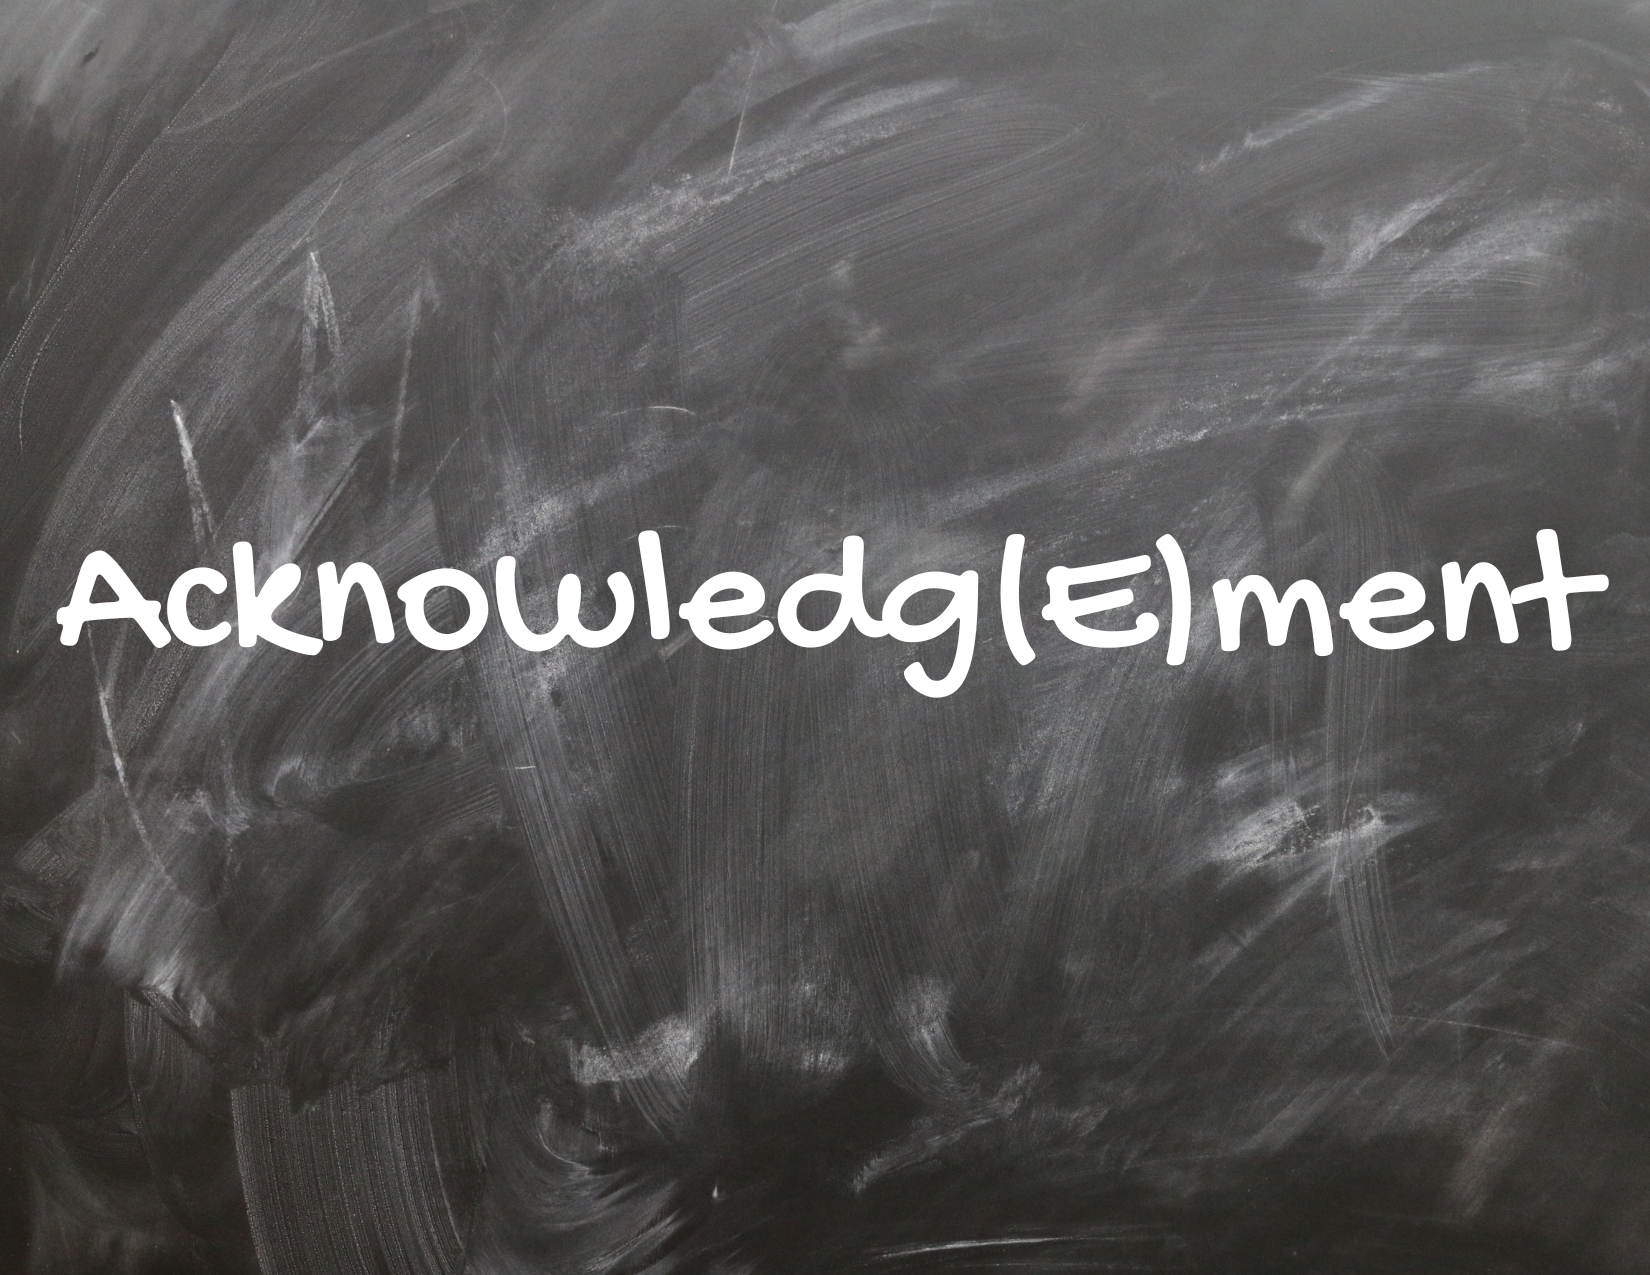 A chalkboard with the word "acknowledgement" written with the letter E capitalised to signify the question: "is it acknowledgement or acknowledgment?"